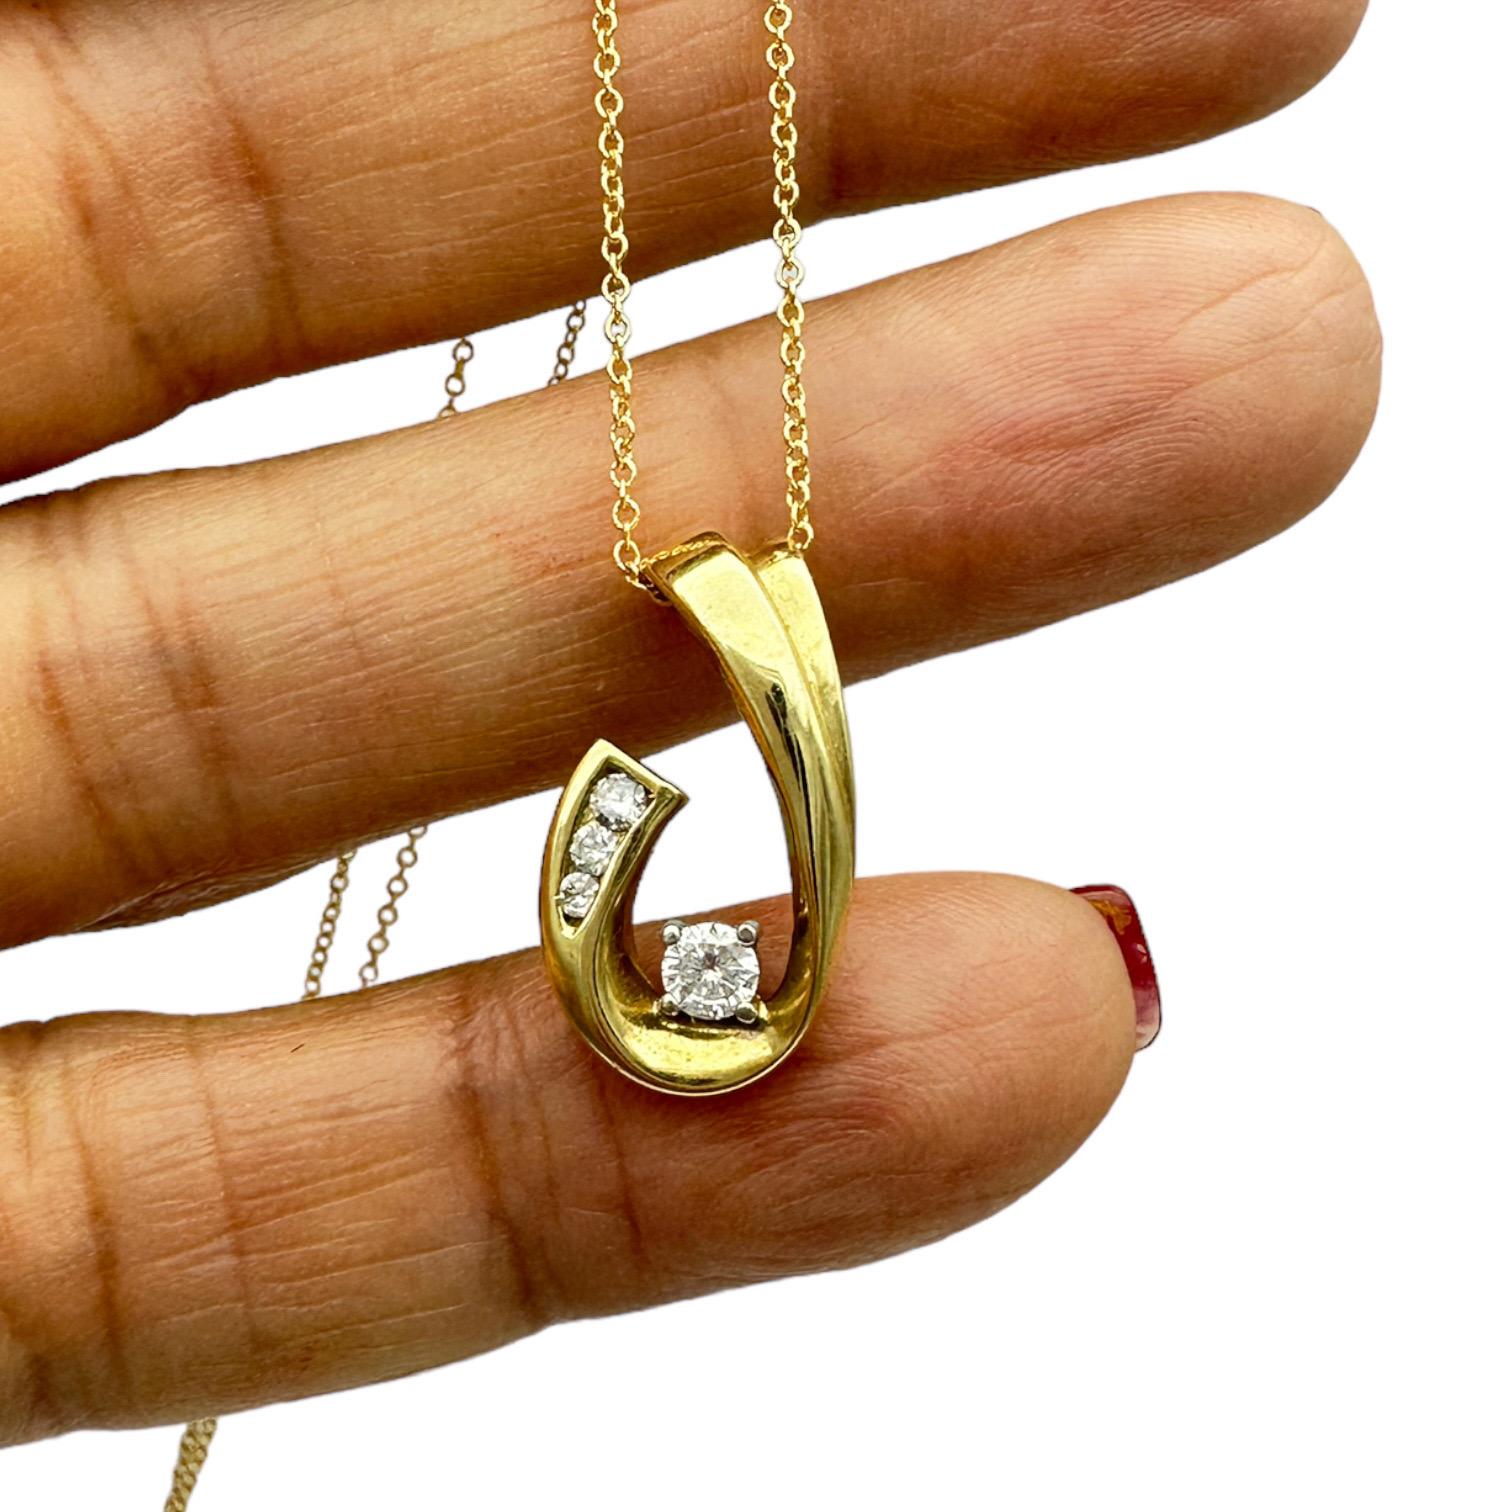 The styled pendant is a round brilliant diamond accented by three three-channel set diamonds. The pendant measures 1-inch long x 1/2 inch wide and is sturdy with a 10mm wide bail opening for any accommodating omega chain.
This modern pendant is